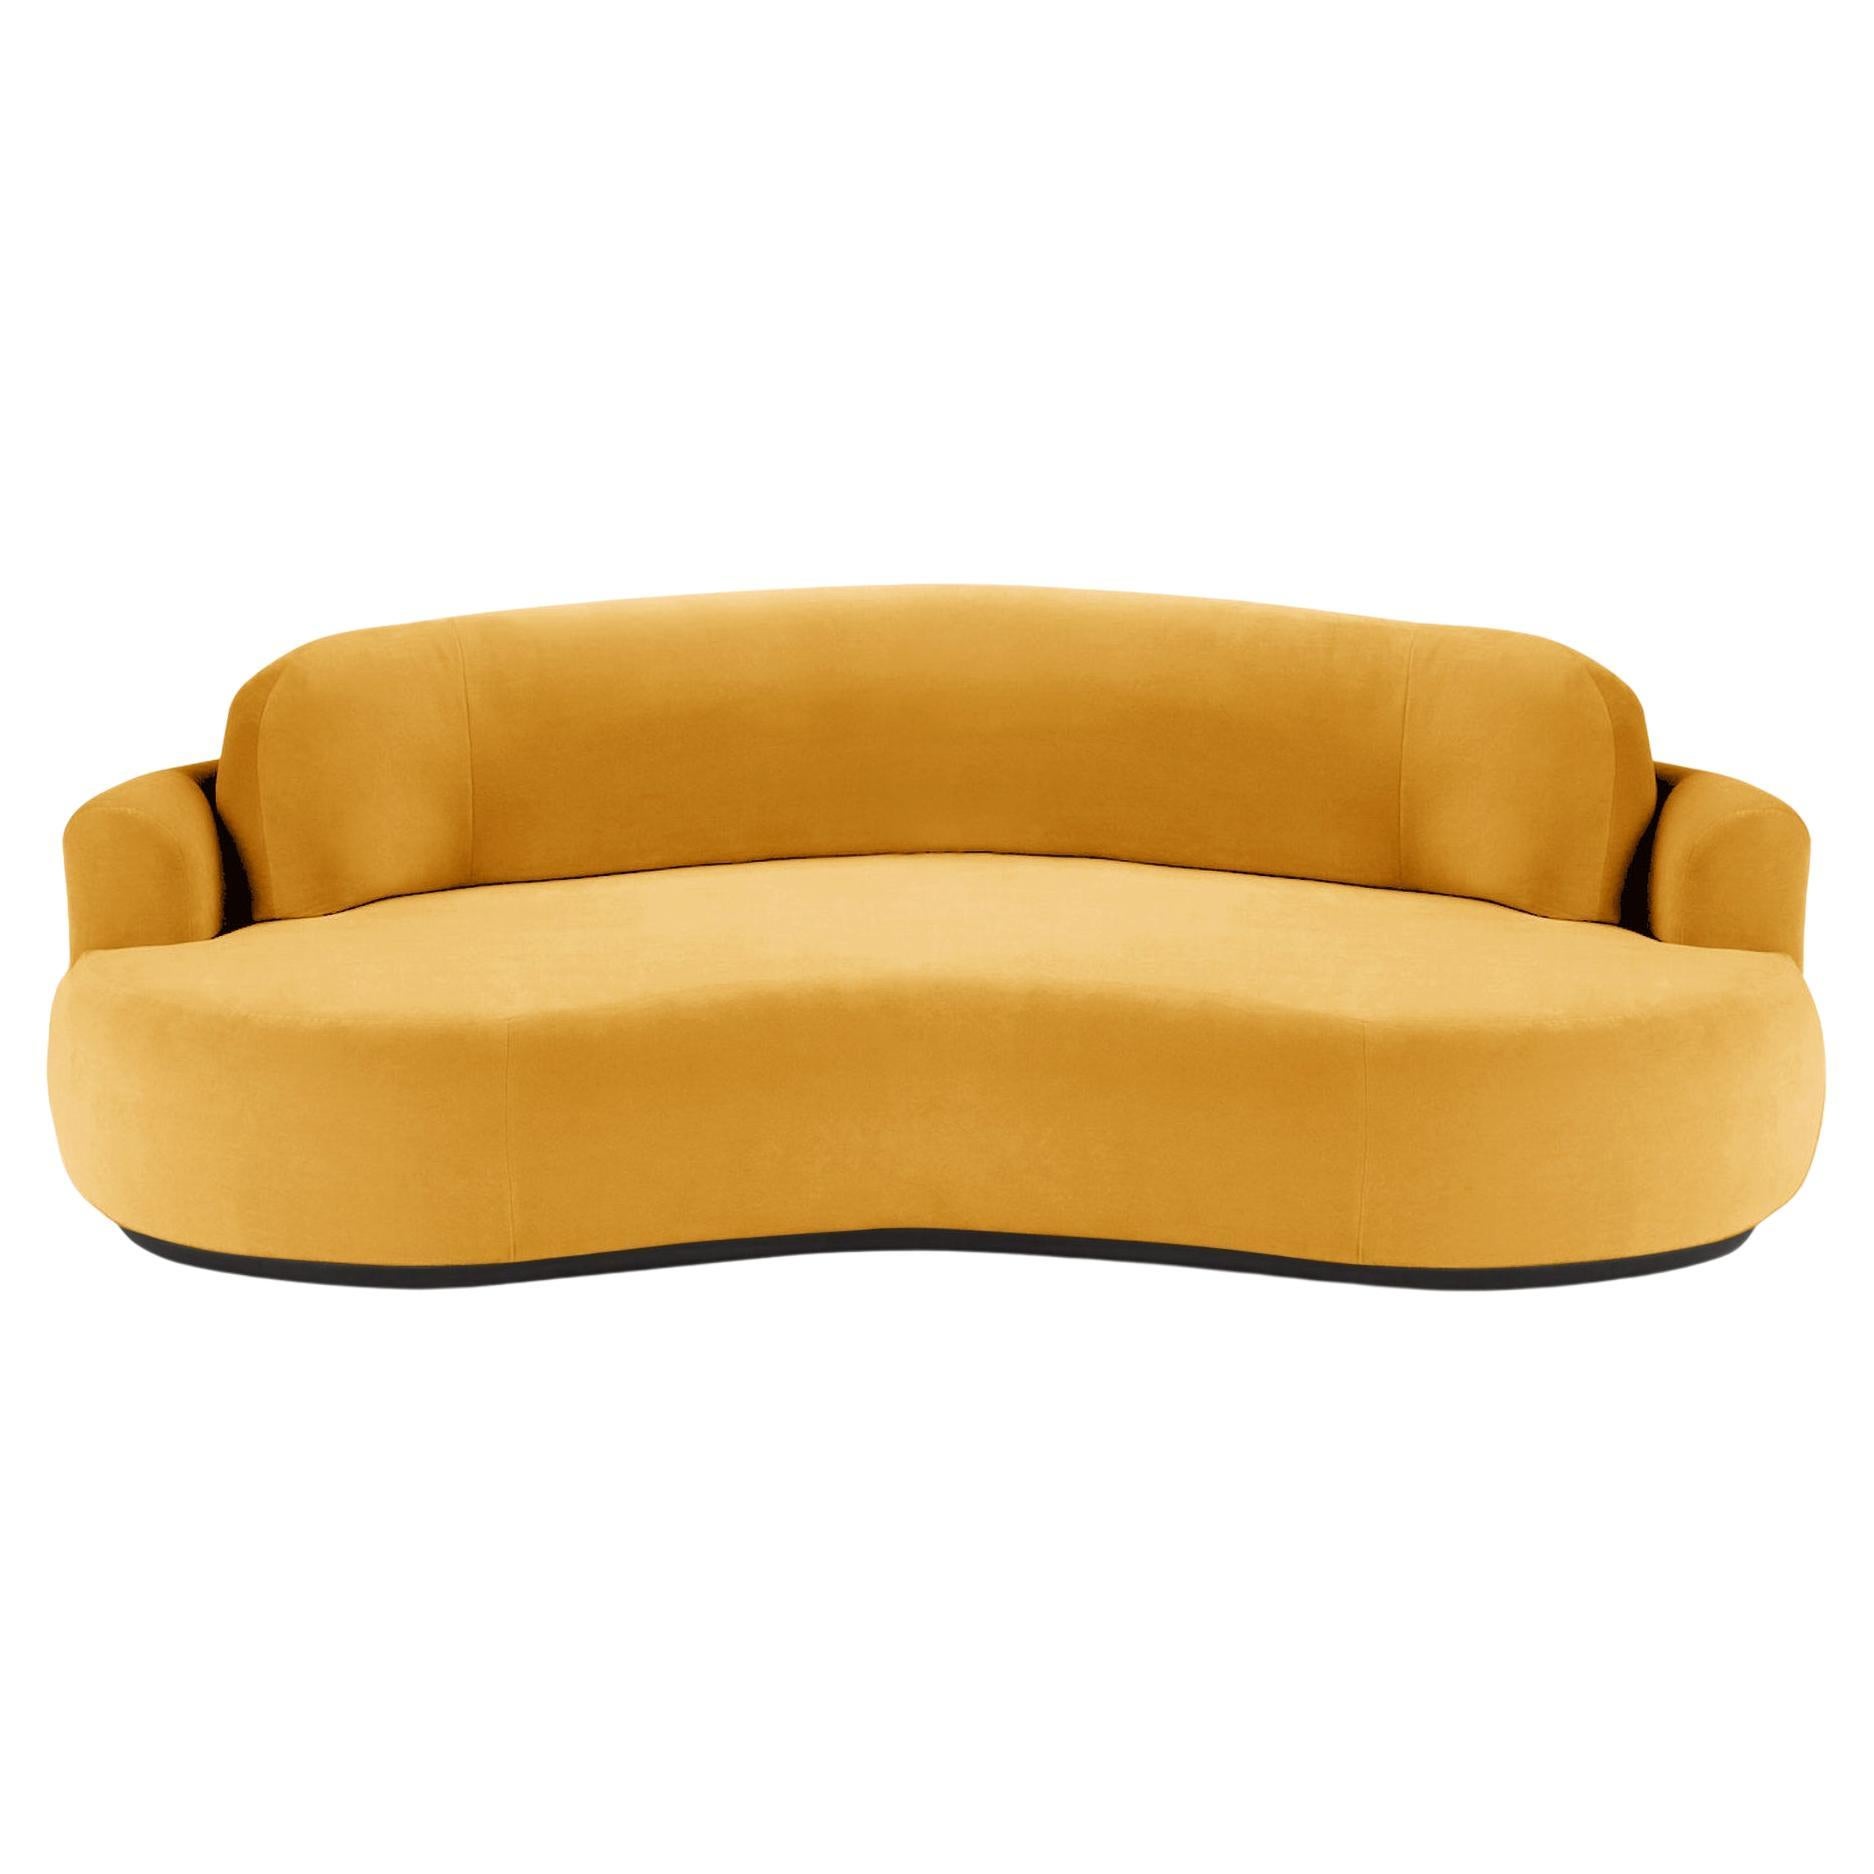 Naked Round Sofa, Small with Beech Ash-056-5 and Corn